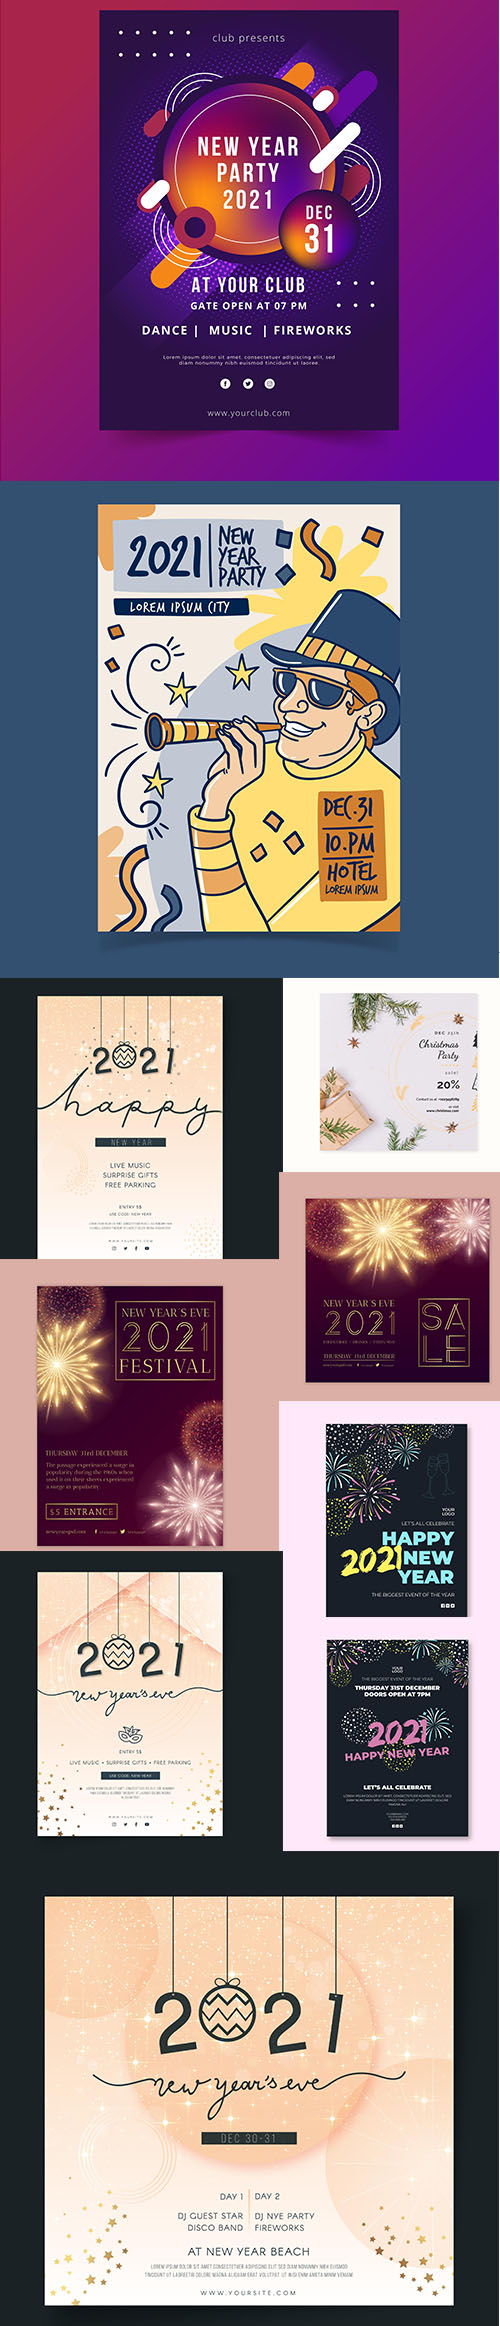 New year flyer template